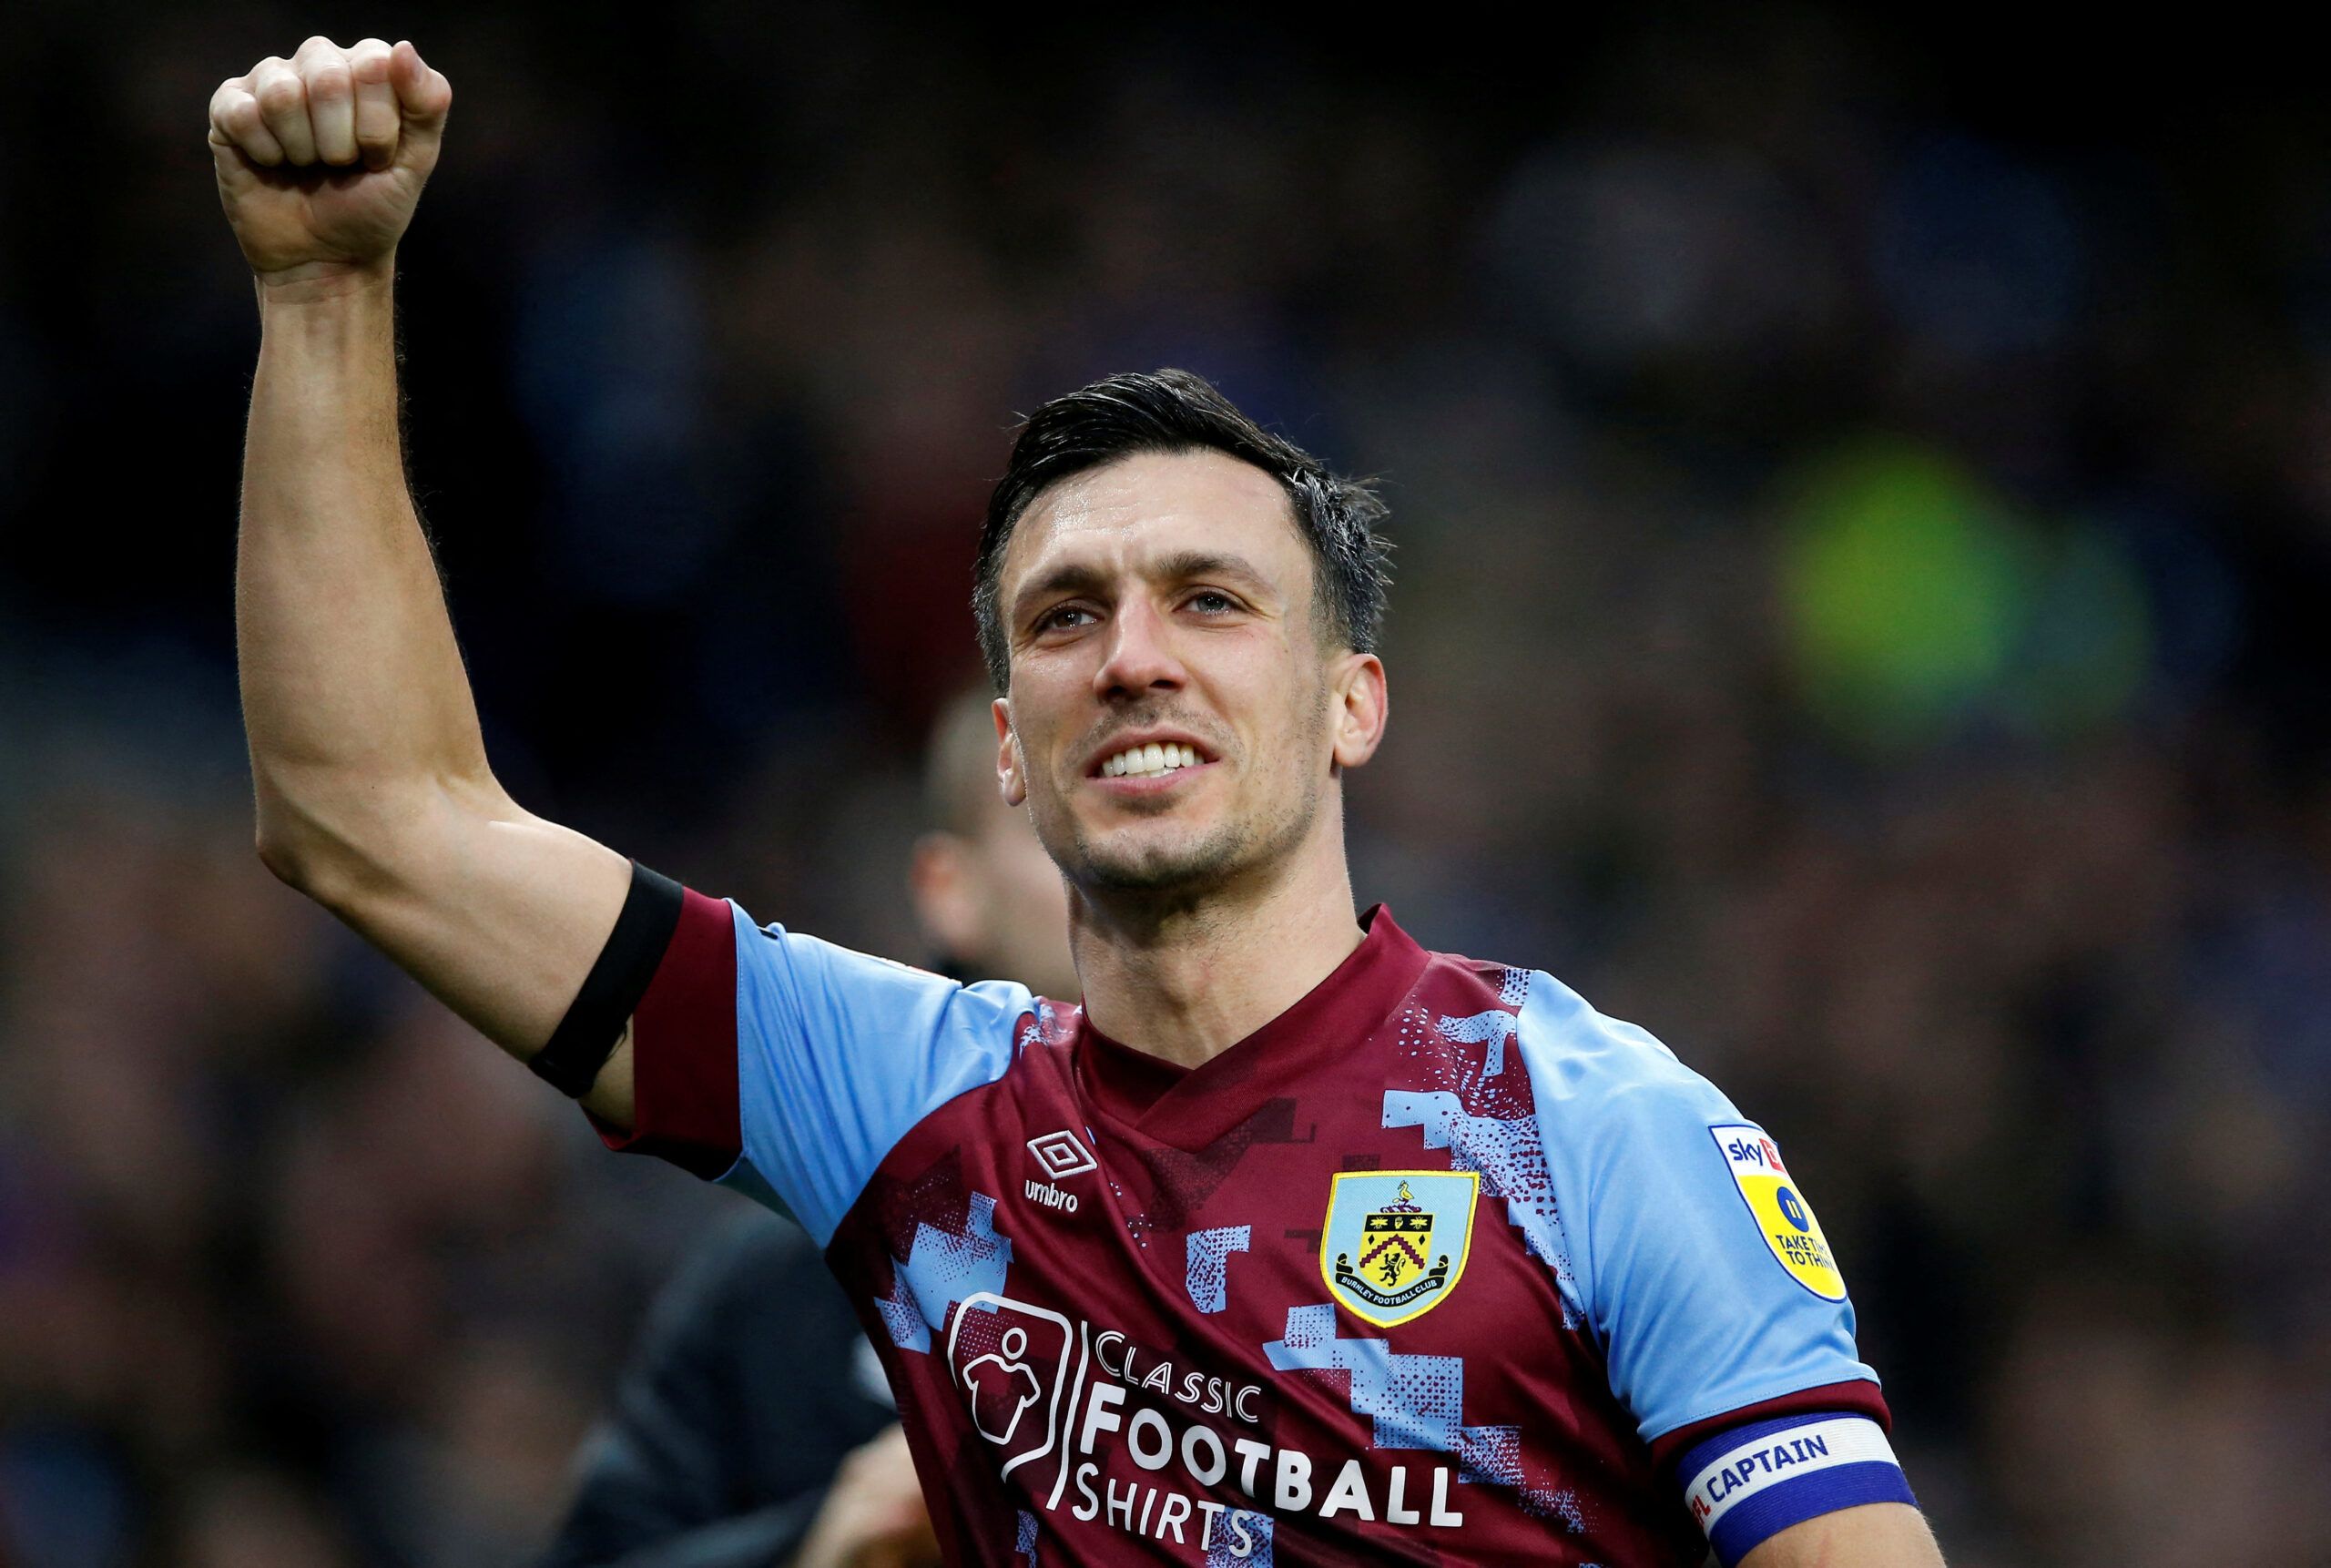 Soccer Football - Championship - Burnley v Preston North End - Turf Moor, Burnley, Britain - February 11, 2023 Burnley's Jack Cork celebrates after the match Action Images/Craig Brough  EDITORIAL USE ONLY. No use with unauthorized audio, video, data, fixture lists, club/league logos or 